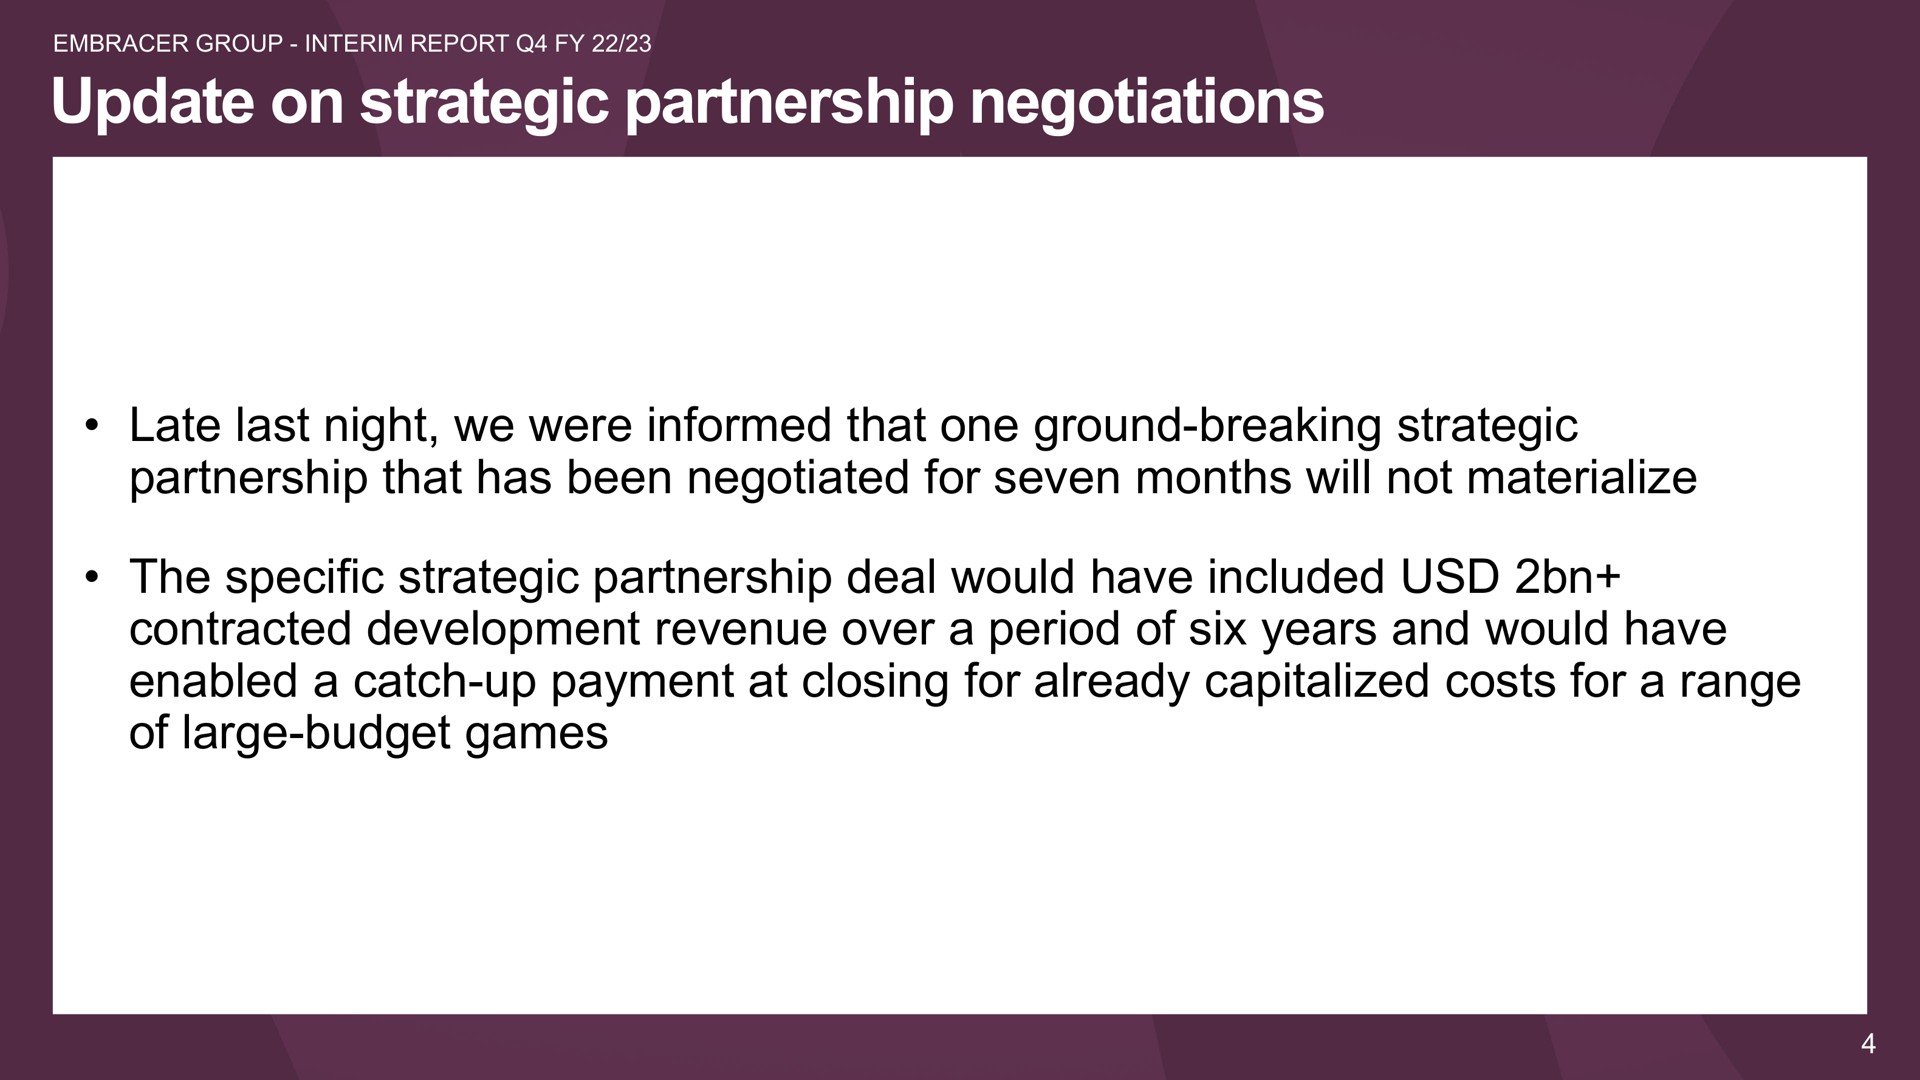 update on strategic partnership negotiations late last night we were informed that one ground breaking strategic partnership that has been negotiated for seven months will not materialize the specific strategic partnership deal would have included contracted development revenue over a period of six years and would have enabled a catch up payment at closing for already capitalized costs for a range of large budget games | Embracer Group